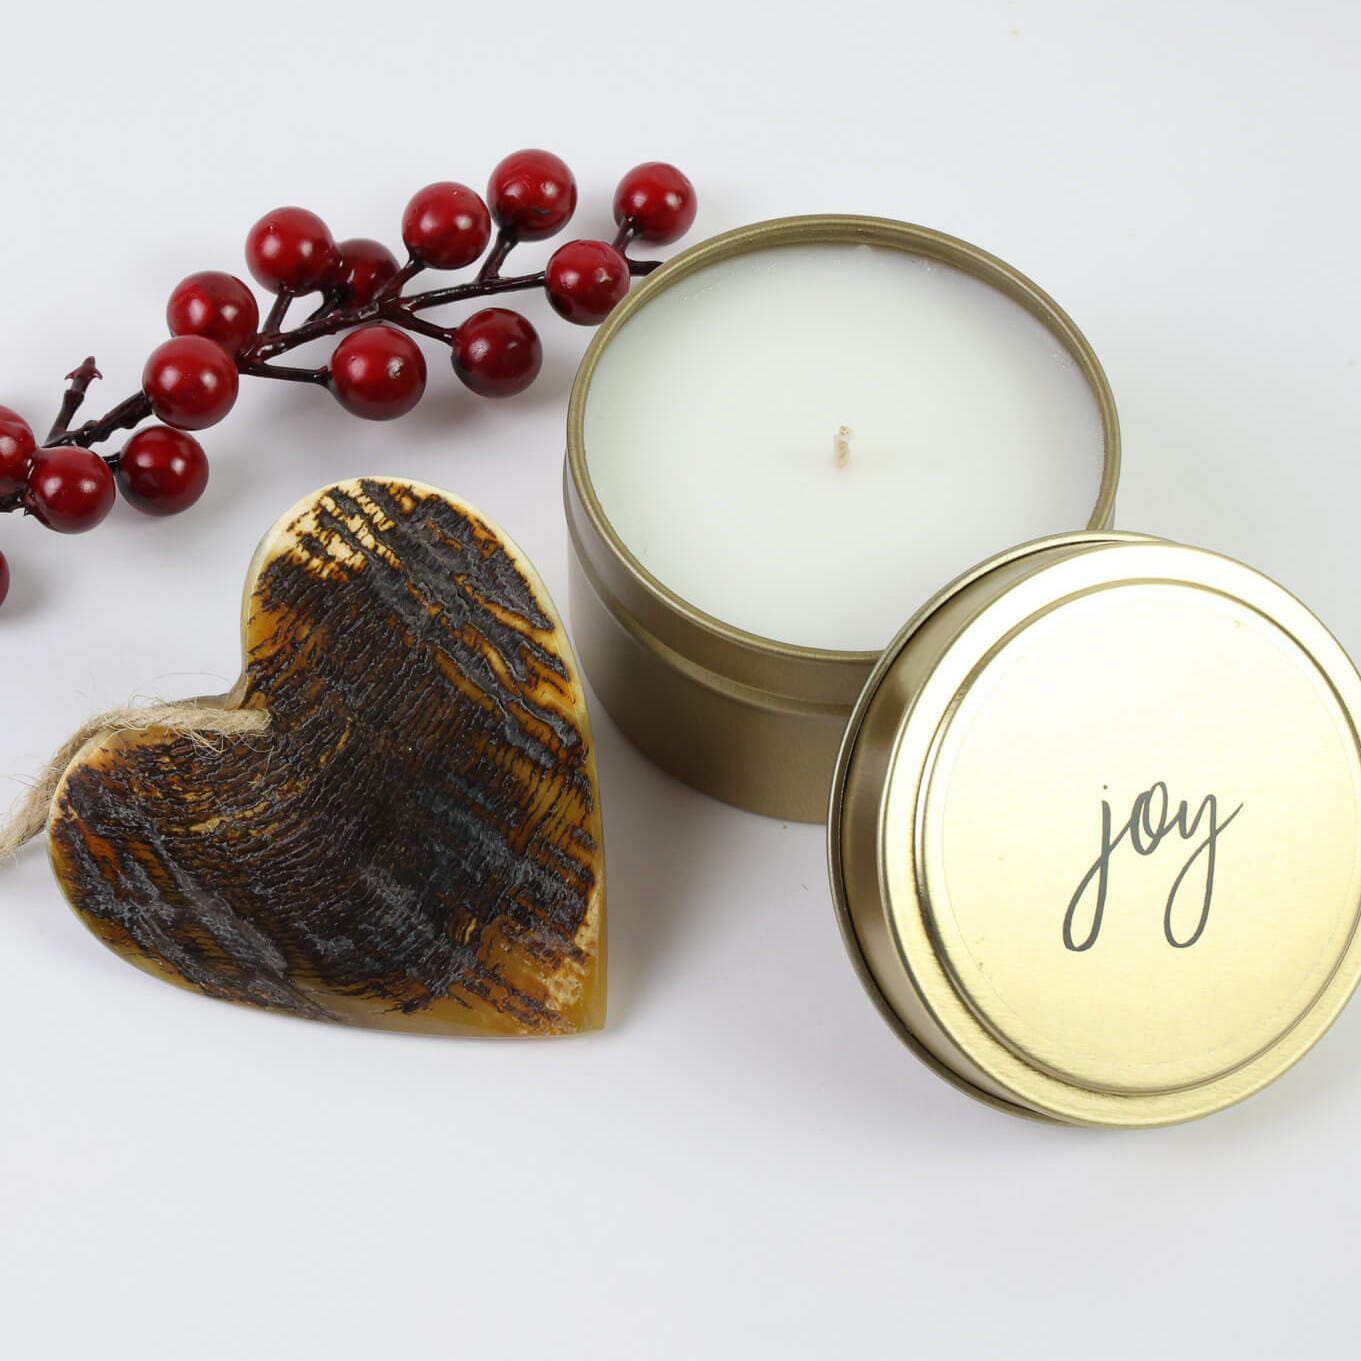 Celebrate the Season holiday gift set, including a handmade candle and ornament